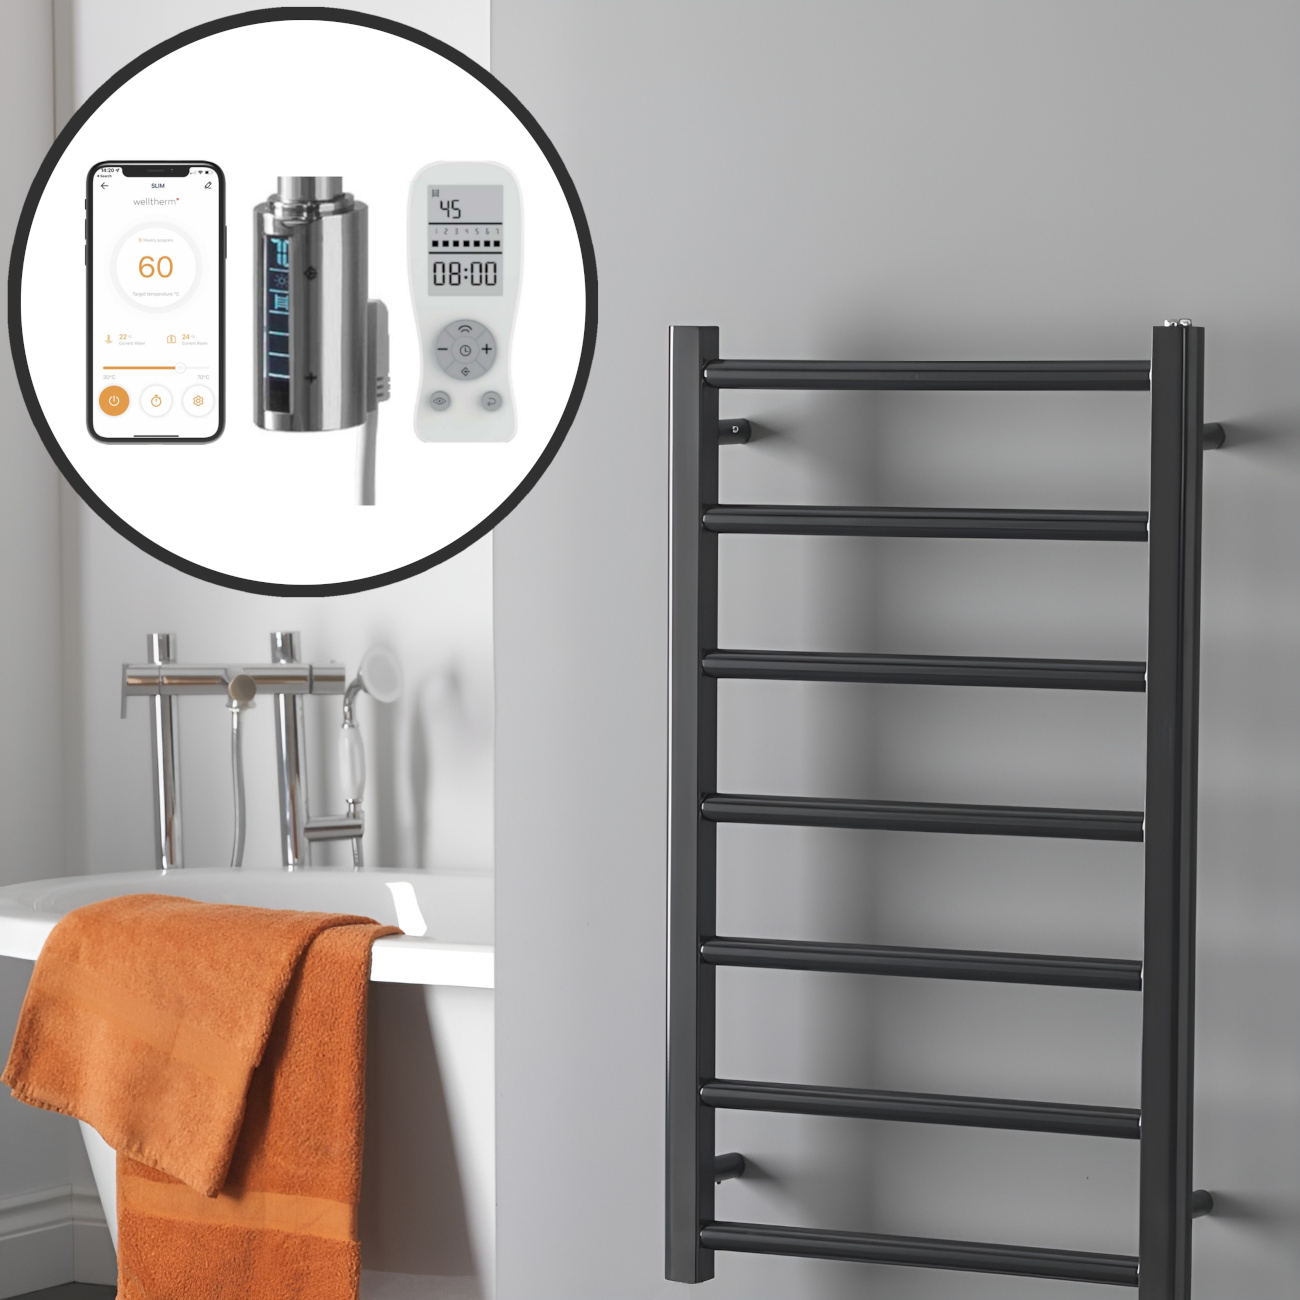 Alpine Anthracite | Smart Electric Towel Rail with Thermostat, Timer + WiFi Control Best Quality & Price, Energy Saving / Economic To Run Buy Online From Adax SolAire UK Shop 2